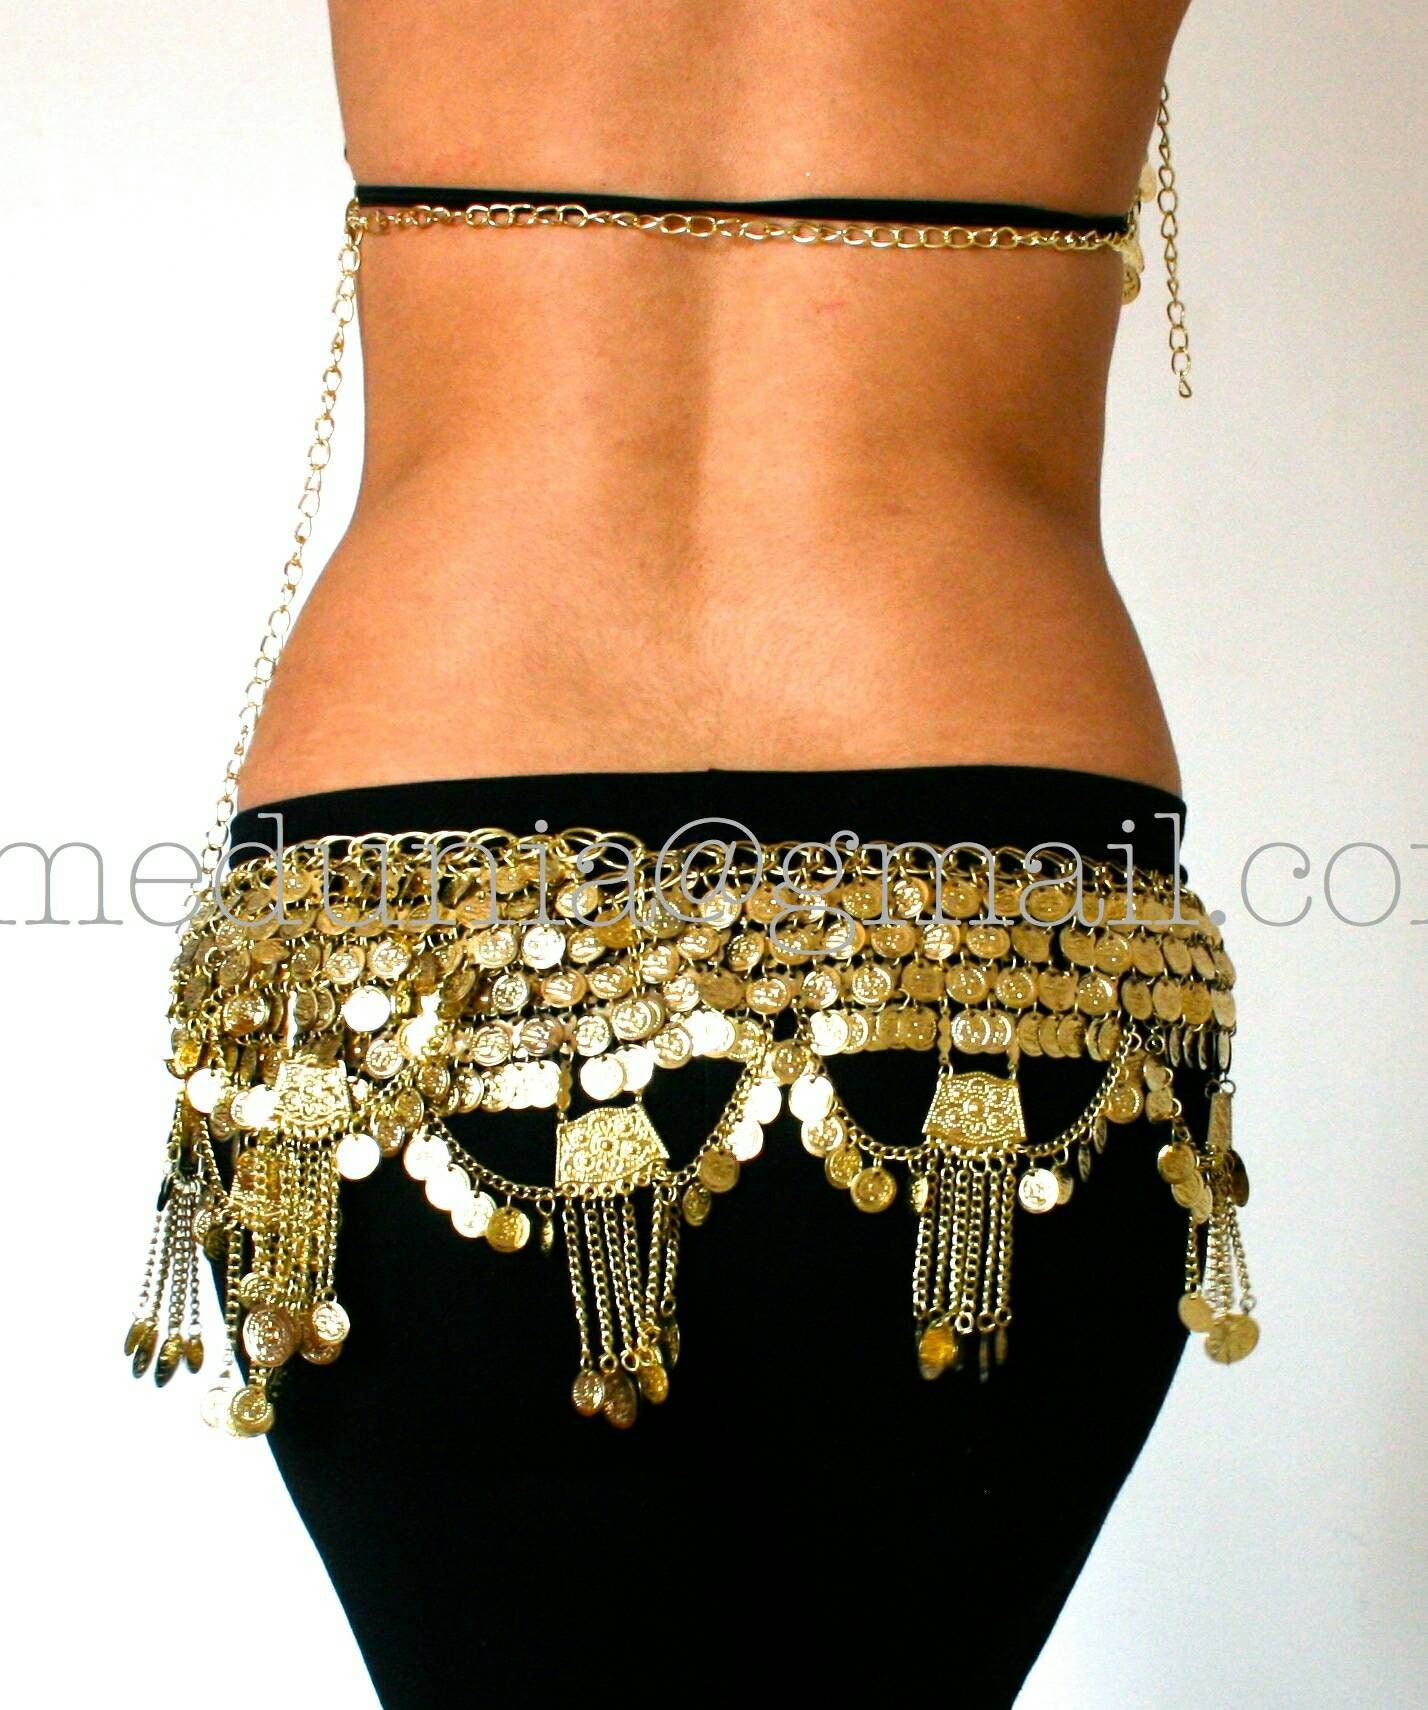 ZLTdream Lady's Belly Dance Bandage Coin Bra Top with Chest - Import It All